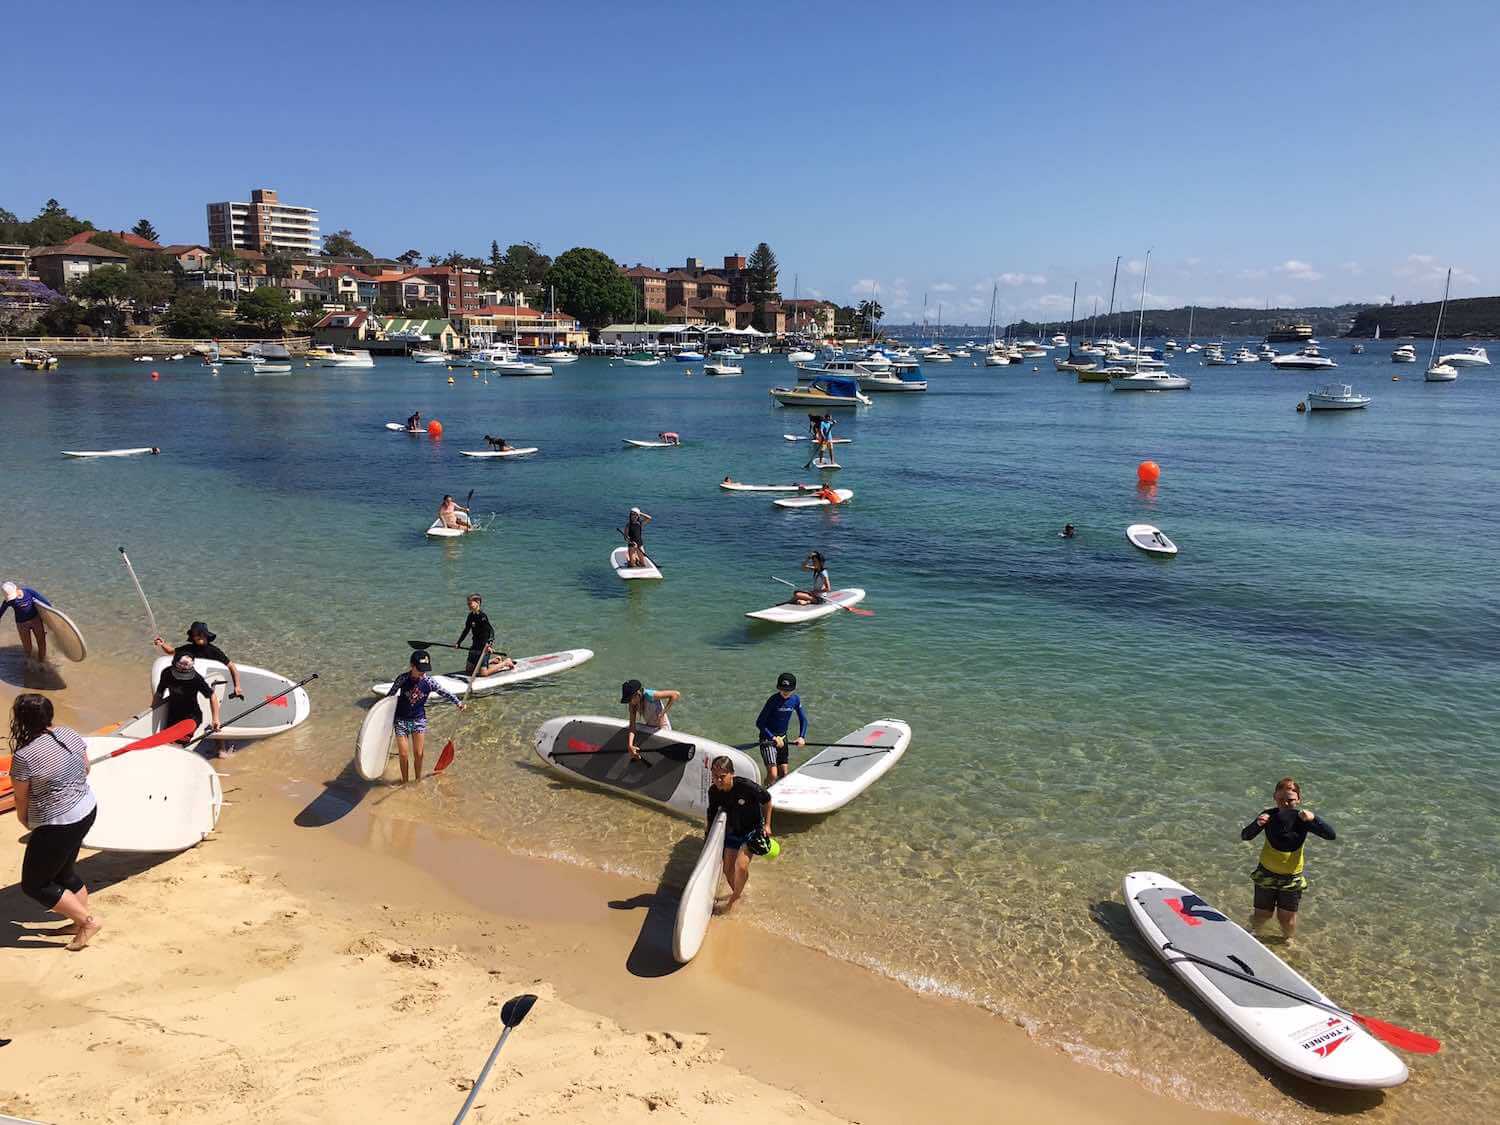 Experience Sydney harbour like the school children do - by stand-up paddle board